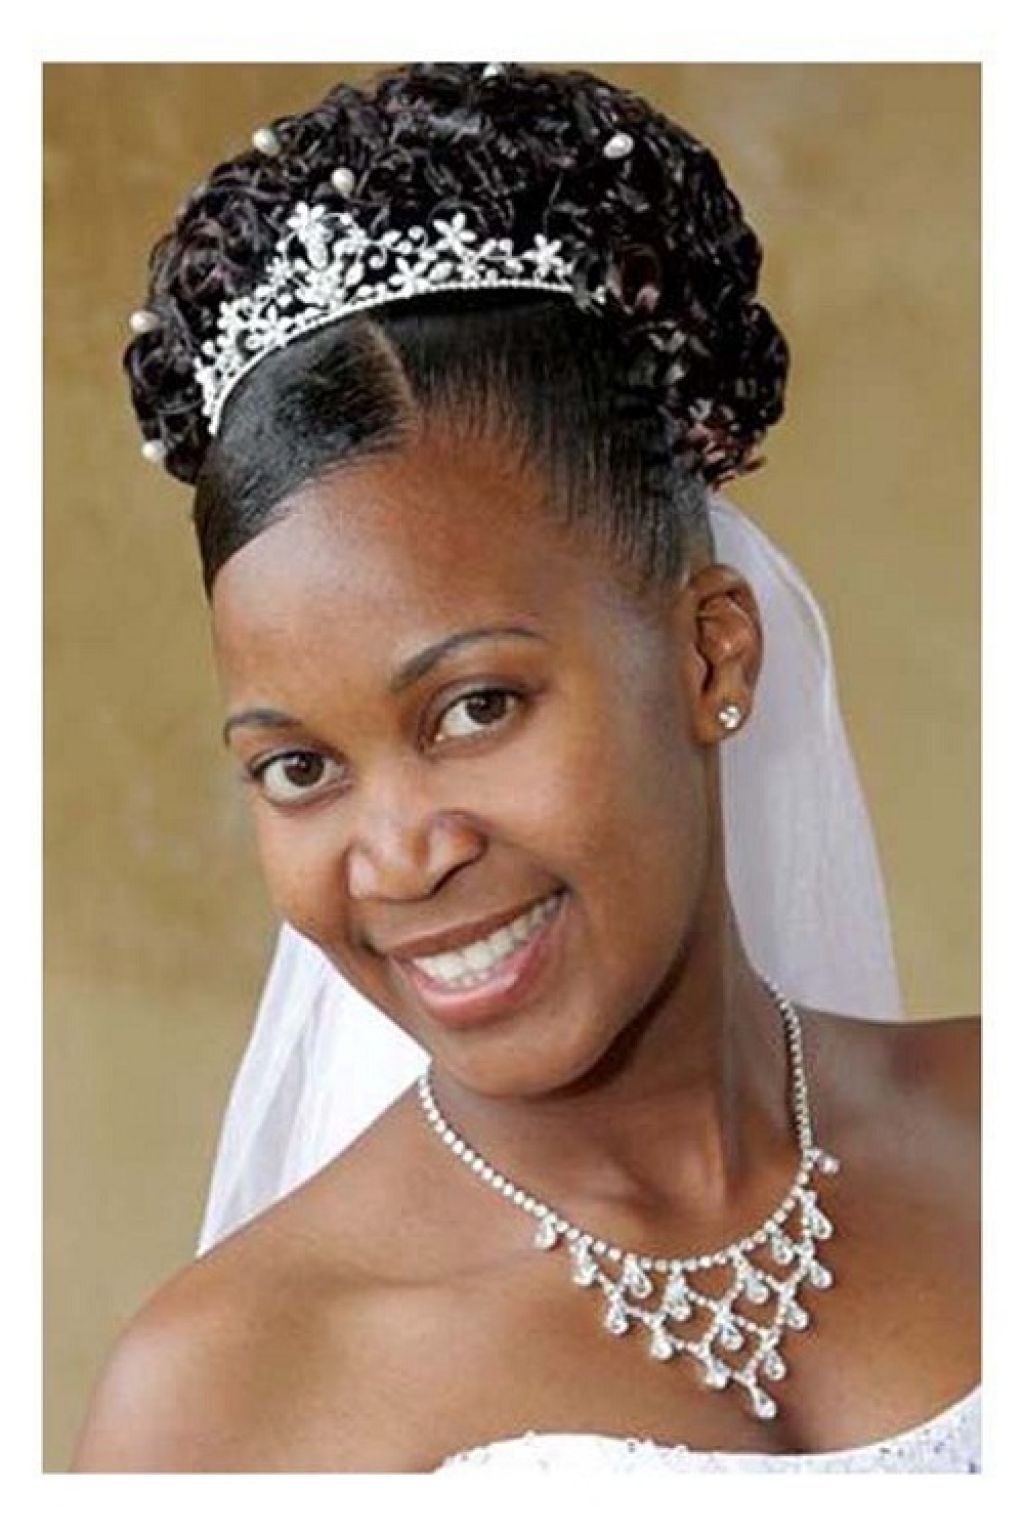 Fashionable Wedding Hairstyles For African Hair Throughout 2017 Natural Wedding Hairstyles For Black Women With Braids (View 4 of 15)